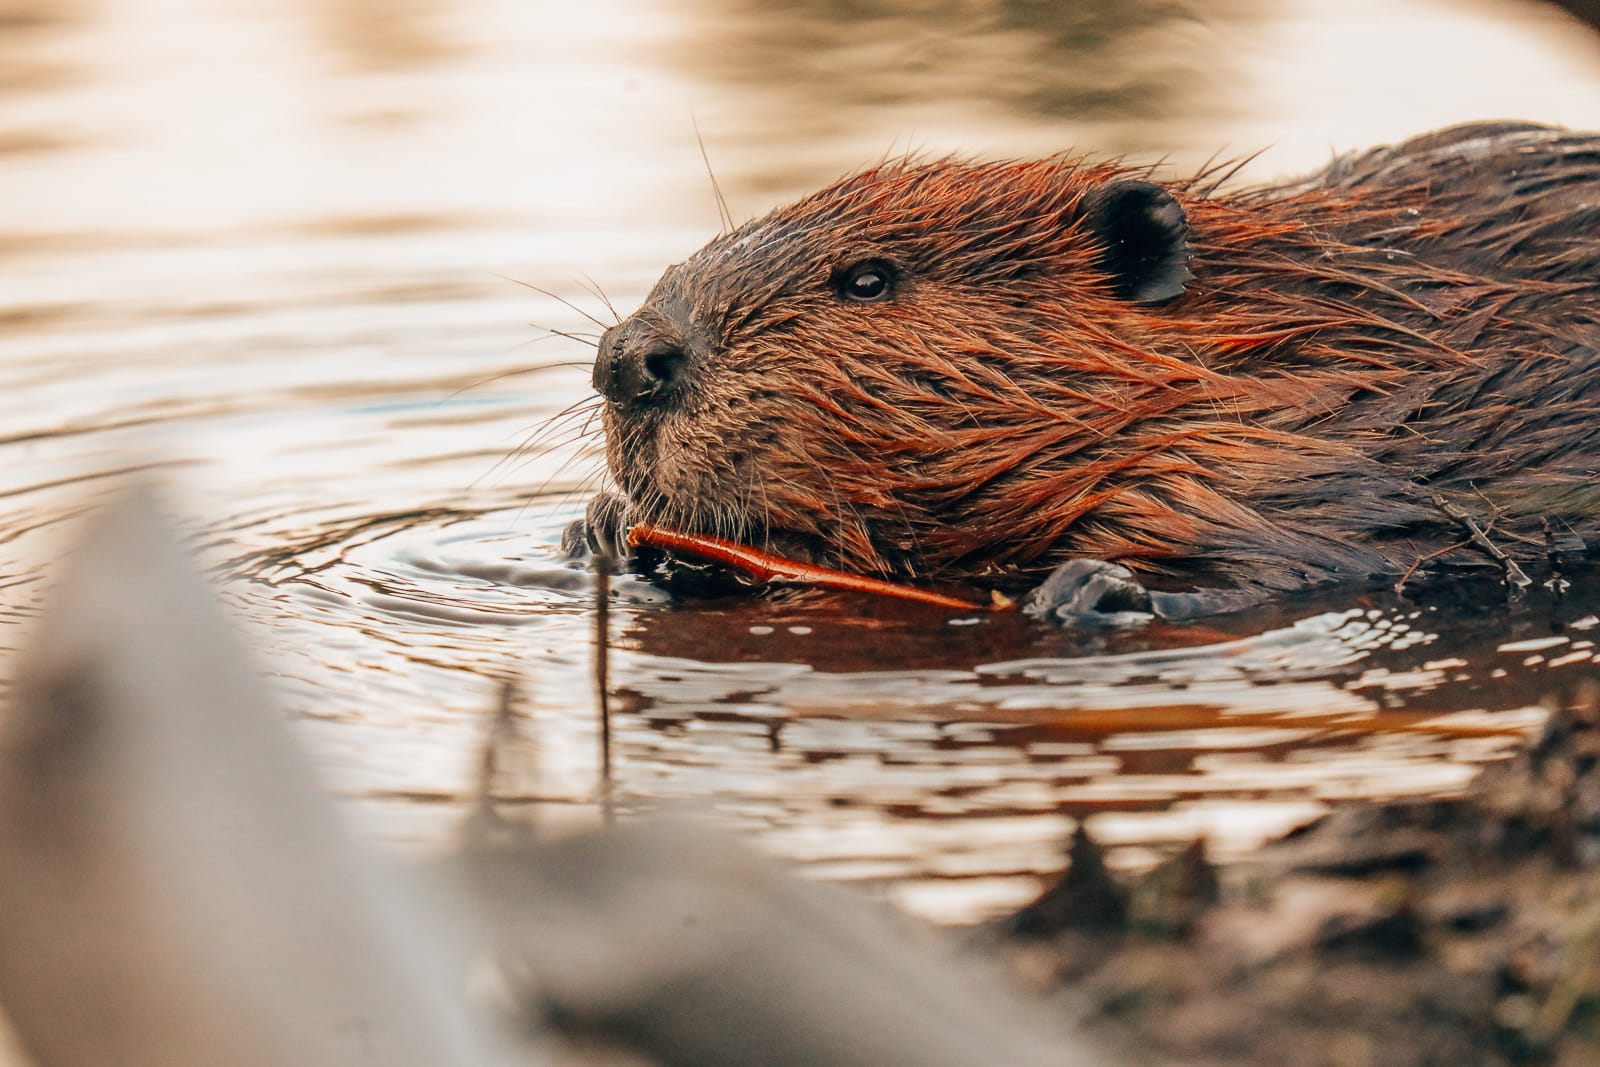 Getting Lost In Nature (And With Beavers) In Quebec, Canada (29)